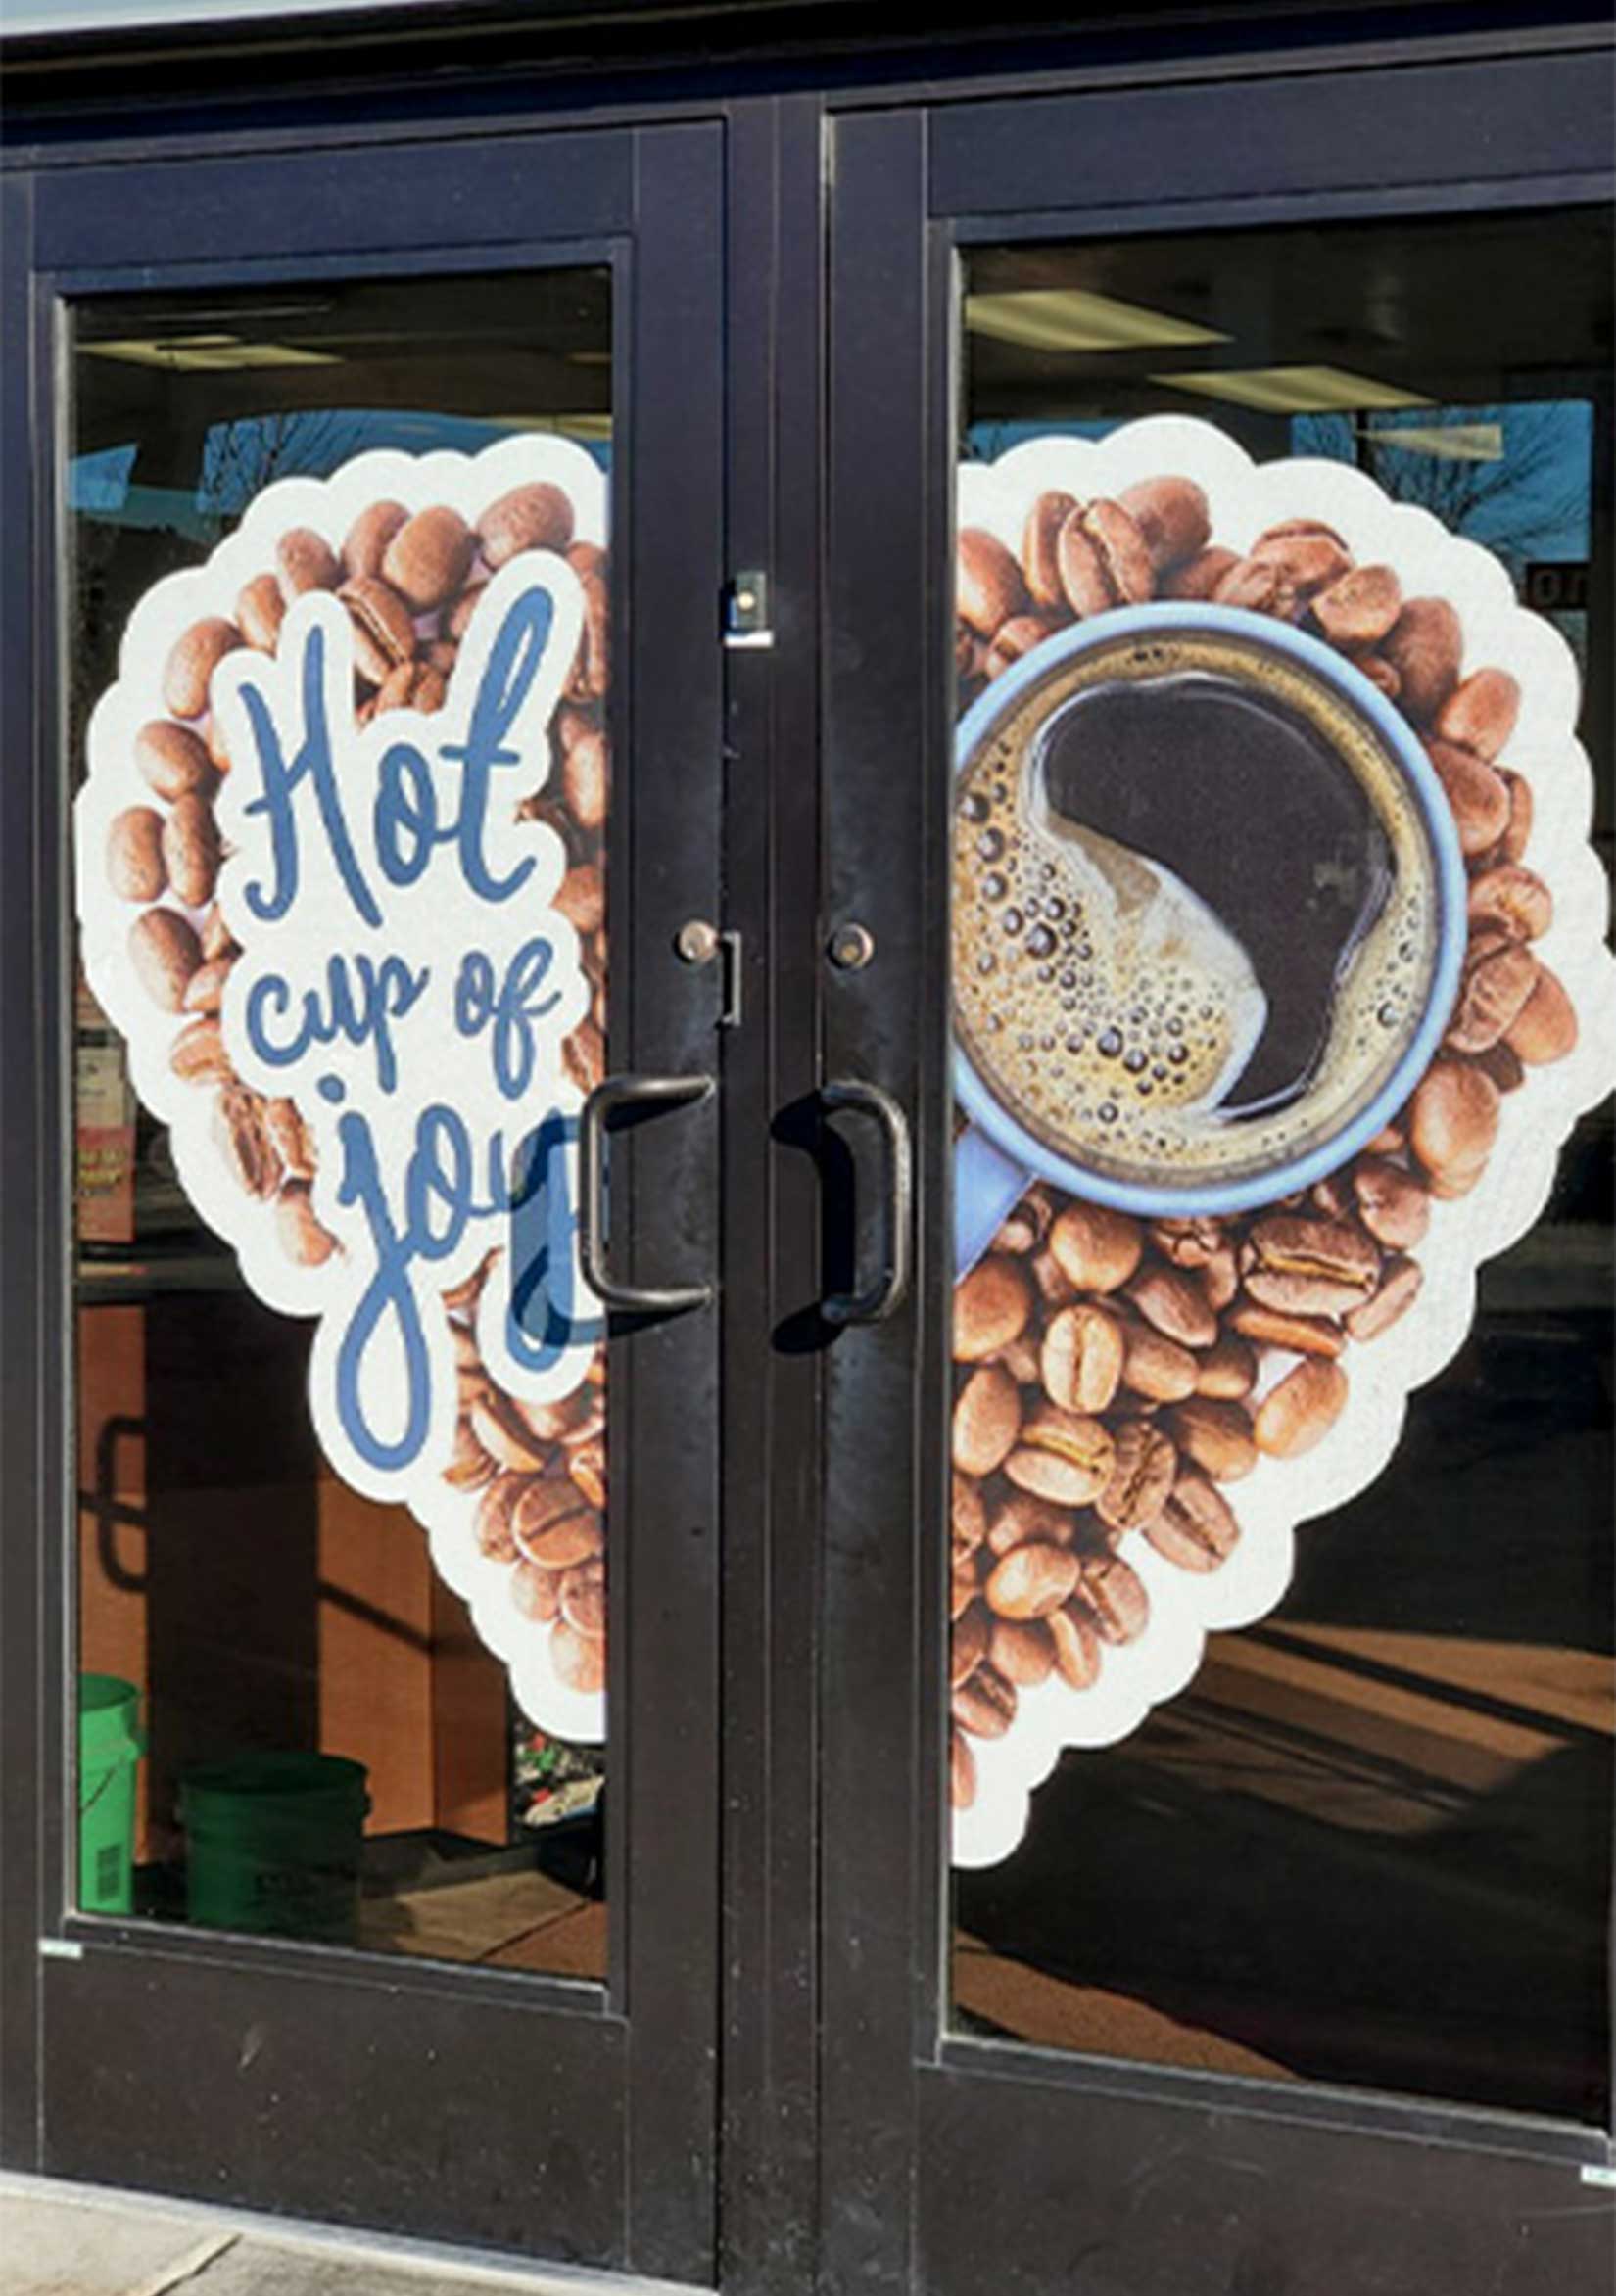 Image of two doors that has large vinyl decals on them that makeup a heart made of coffee beans. One half has a cup of coffee, the other says 'Hot cup of joy'